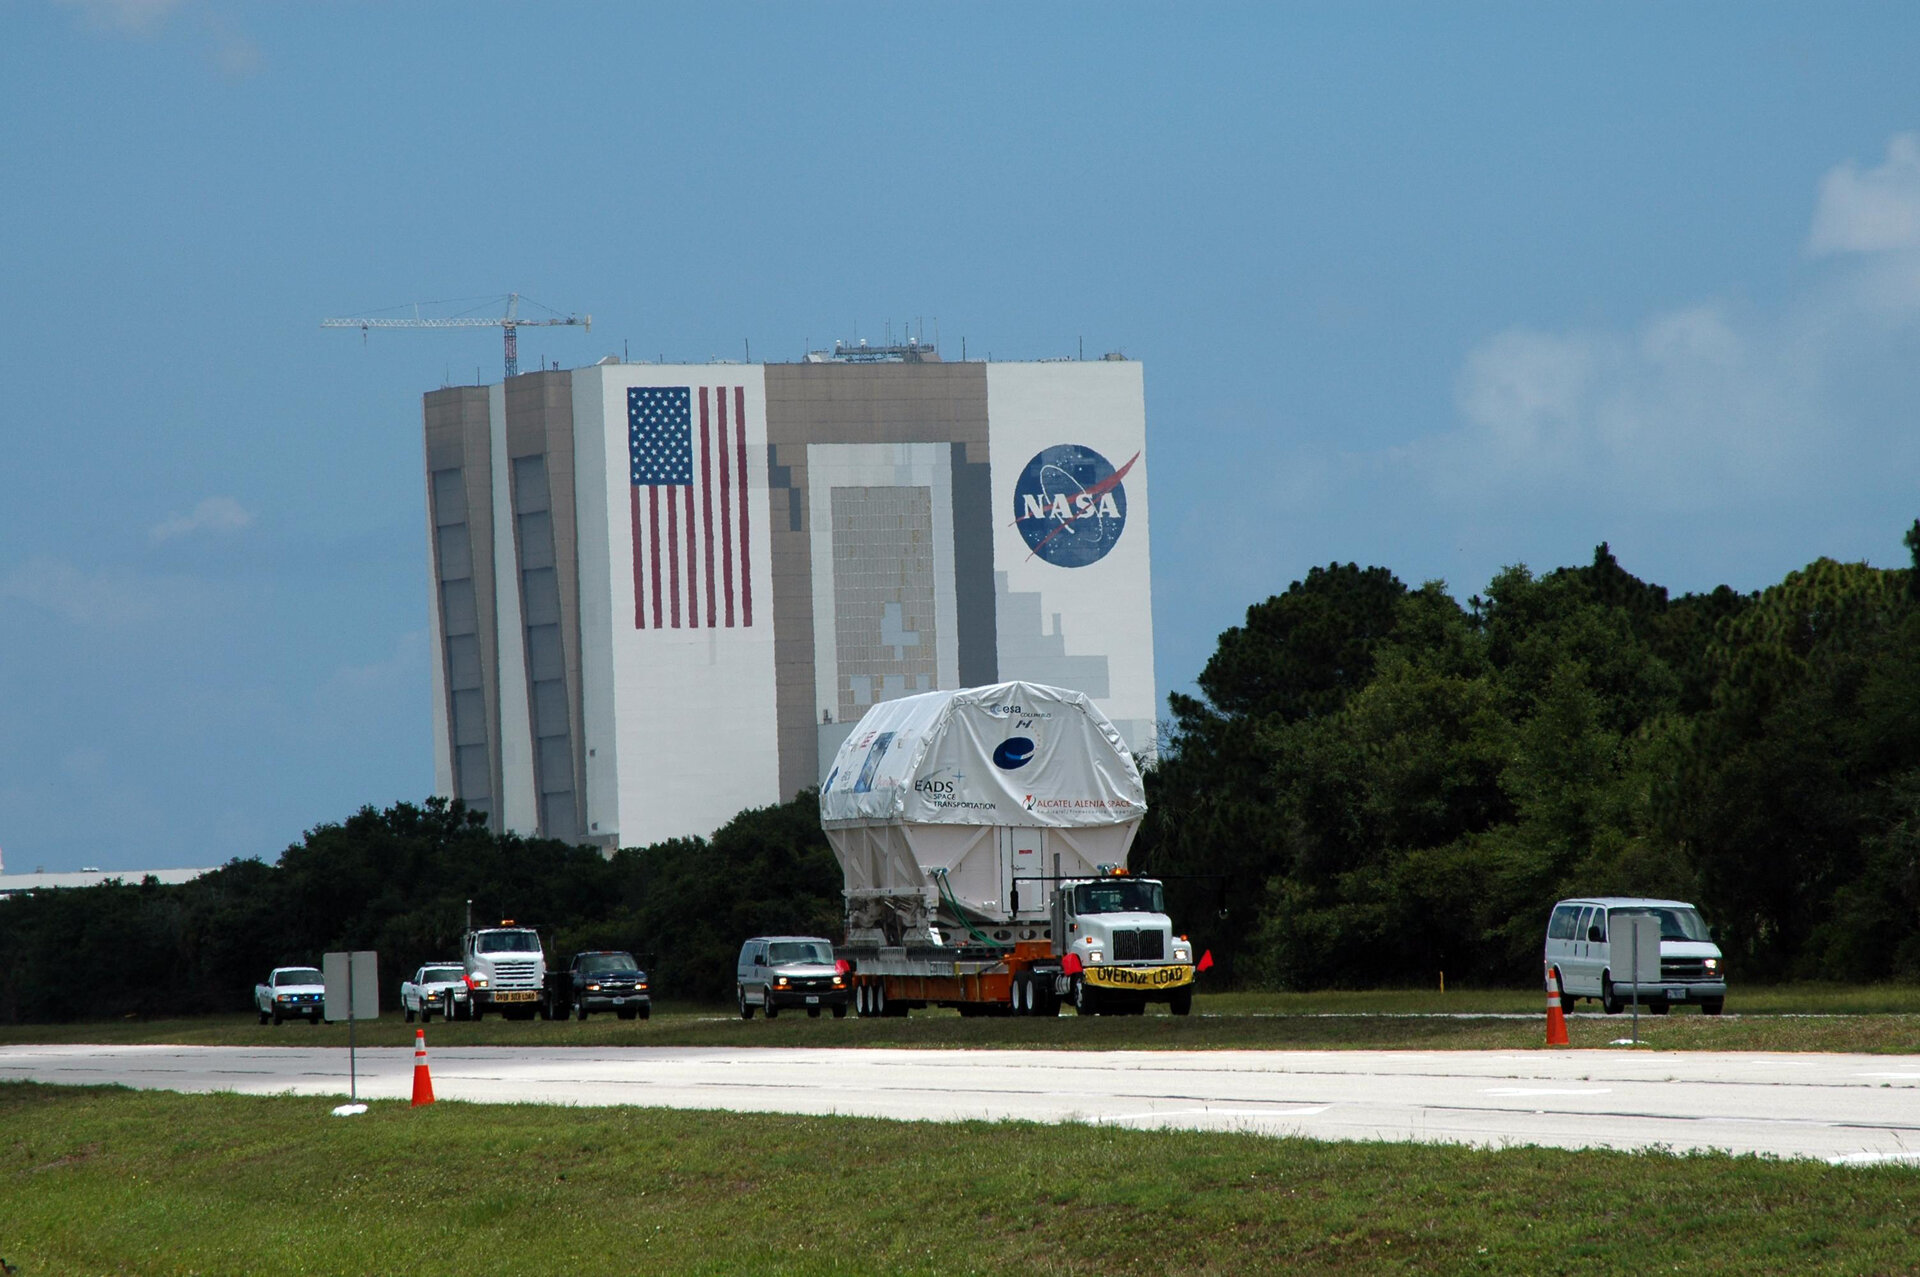 The Columbus laboratory, is moved under escort past the Vehicle Assembly Building at NASA's Kennedy Space Center